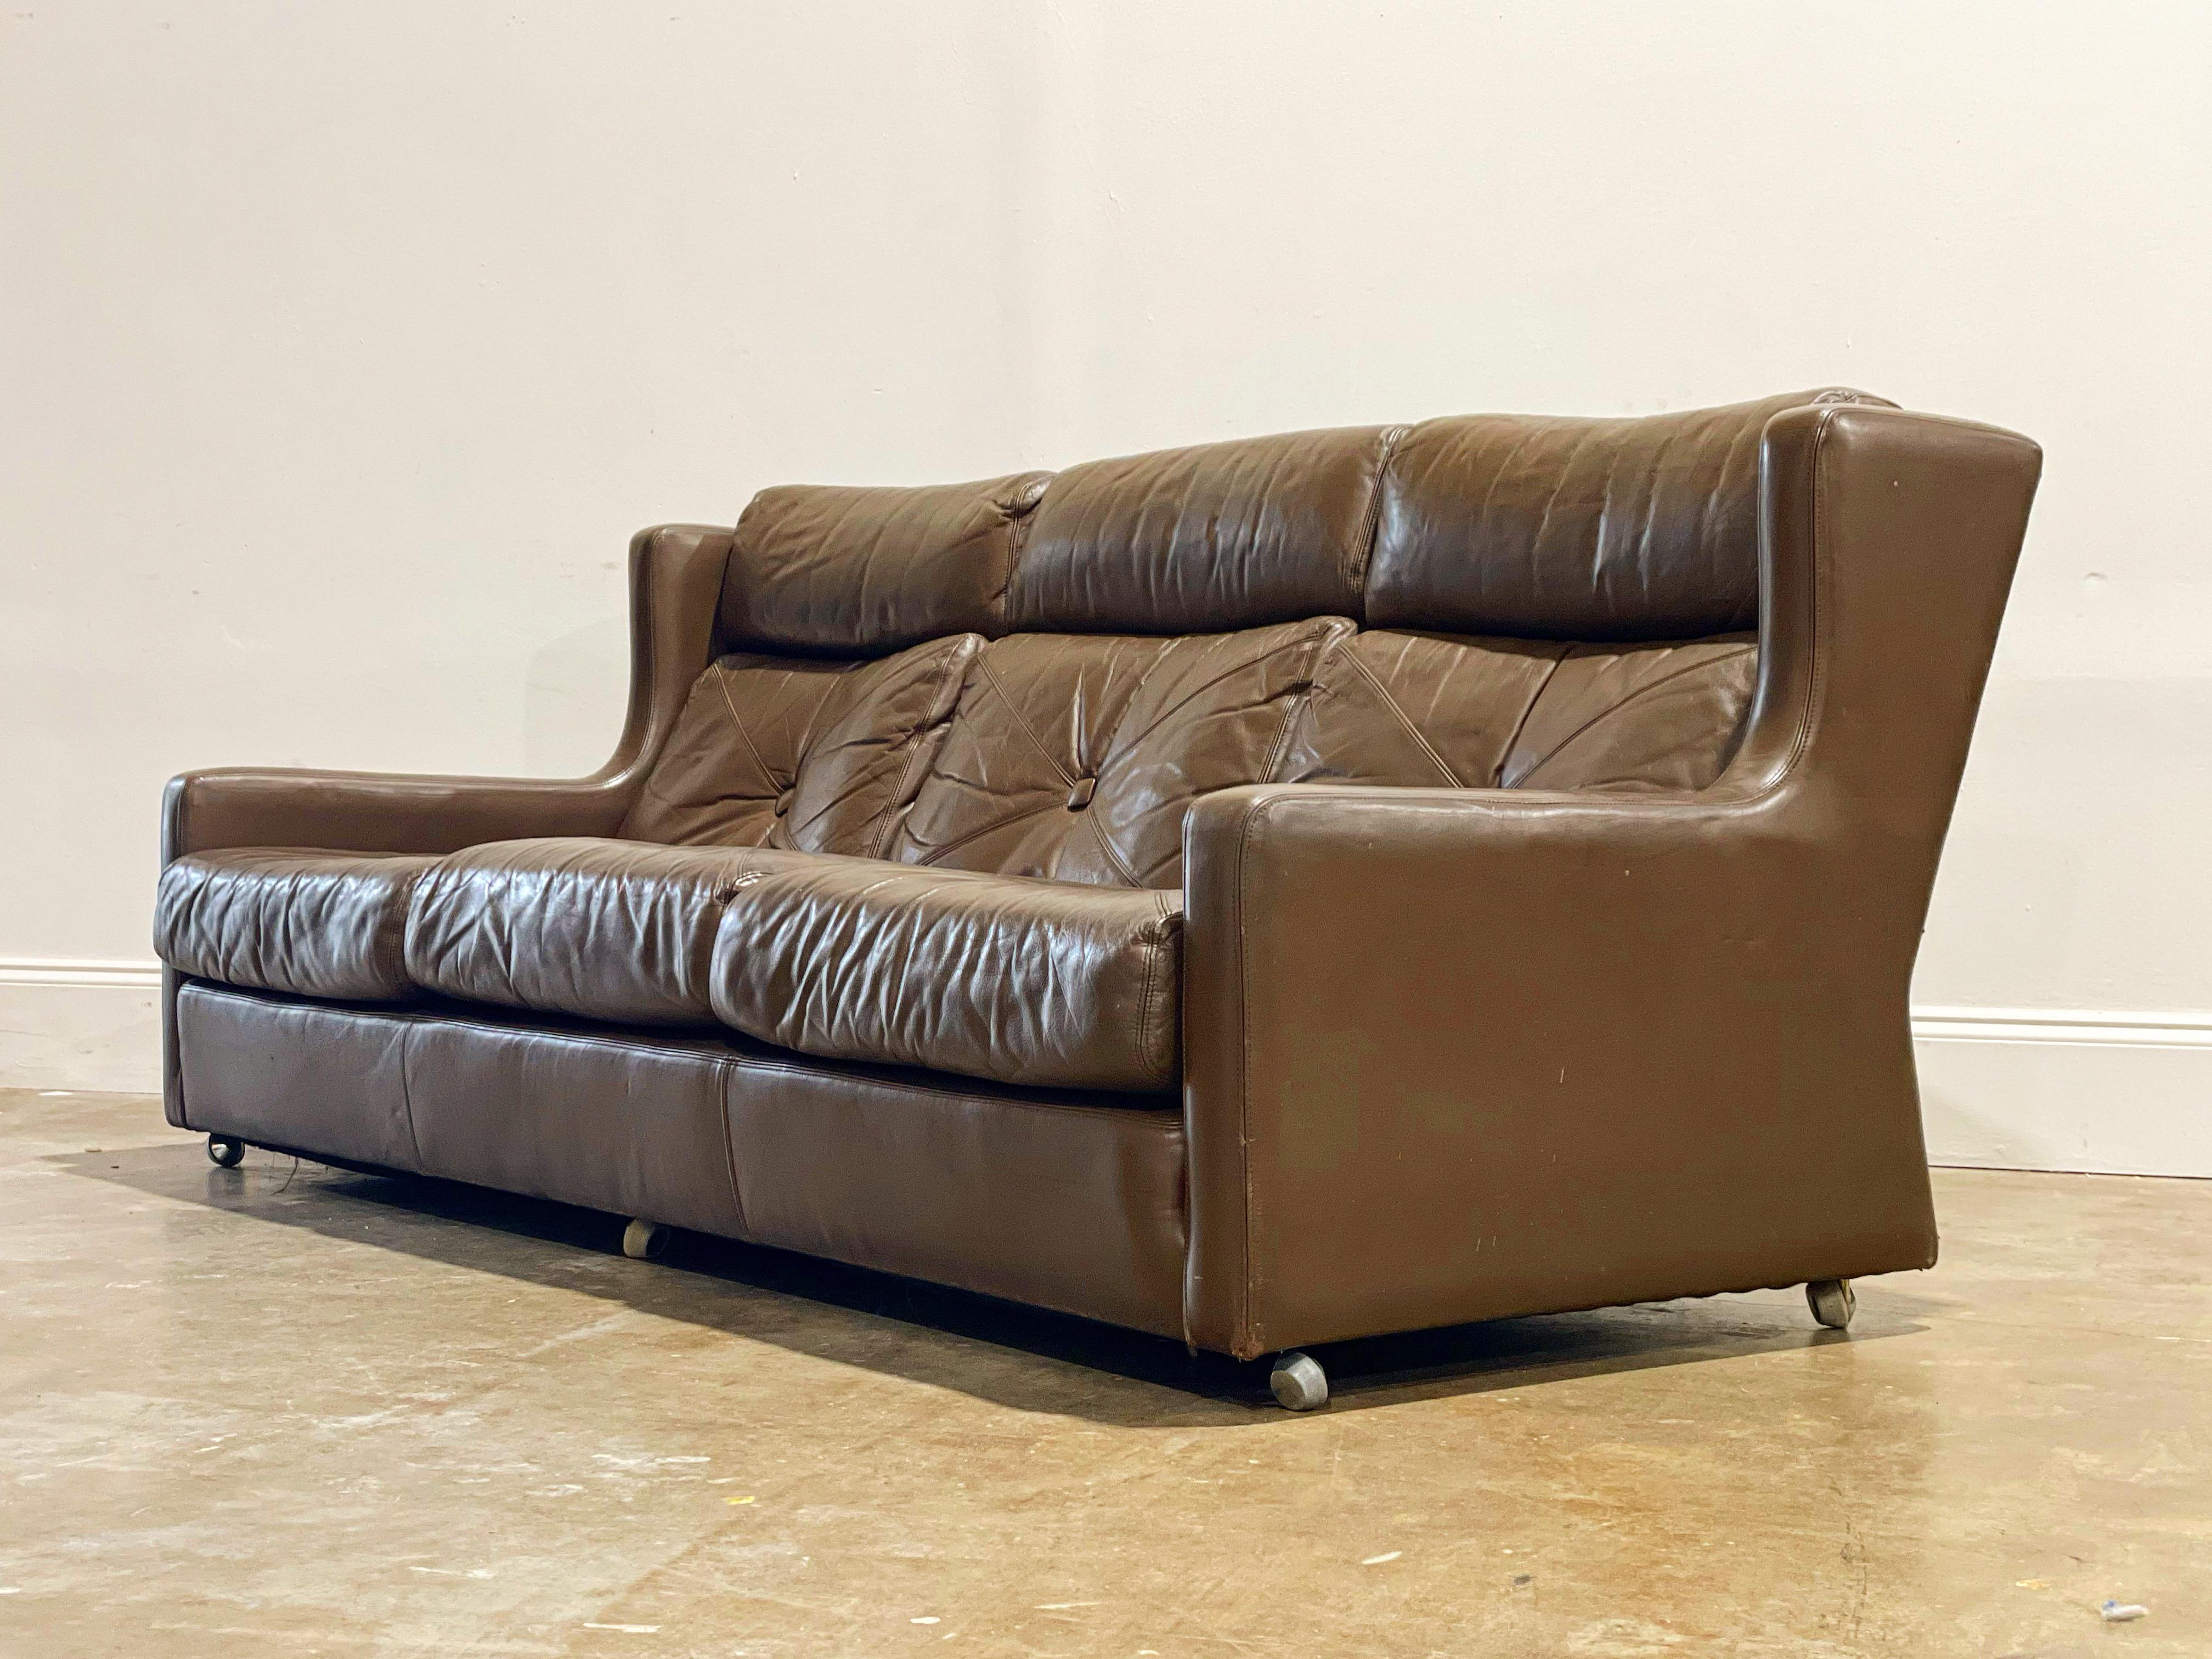 Mid-Century Modern wingback leather sofa by G Plan, circa 1968. Warm chocolate brown and chrome casters. Leather is soft and supple and has aged to perfection with no issues of note. Leather has been cleaned and conditioned - this sofa is ready for